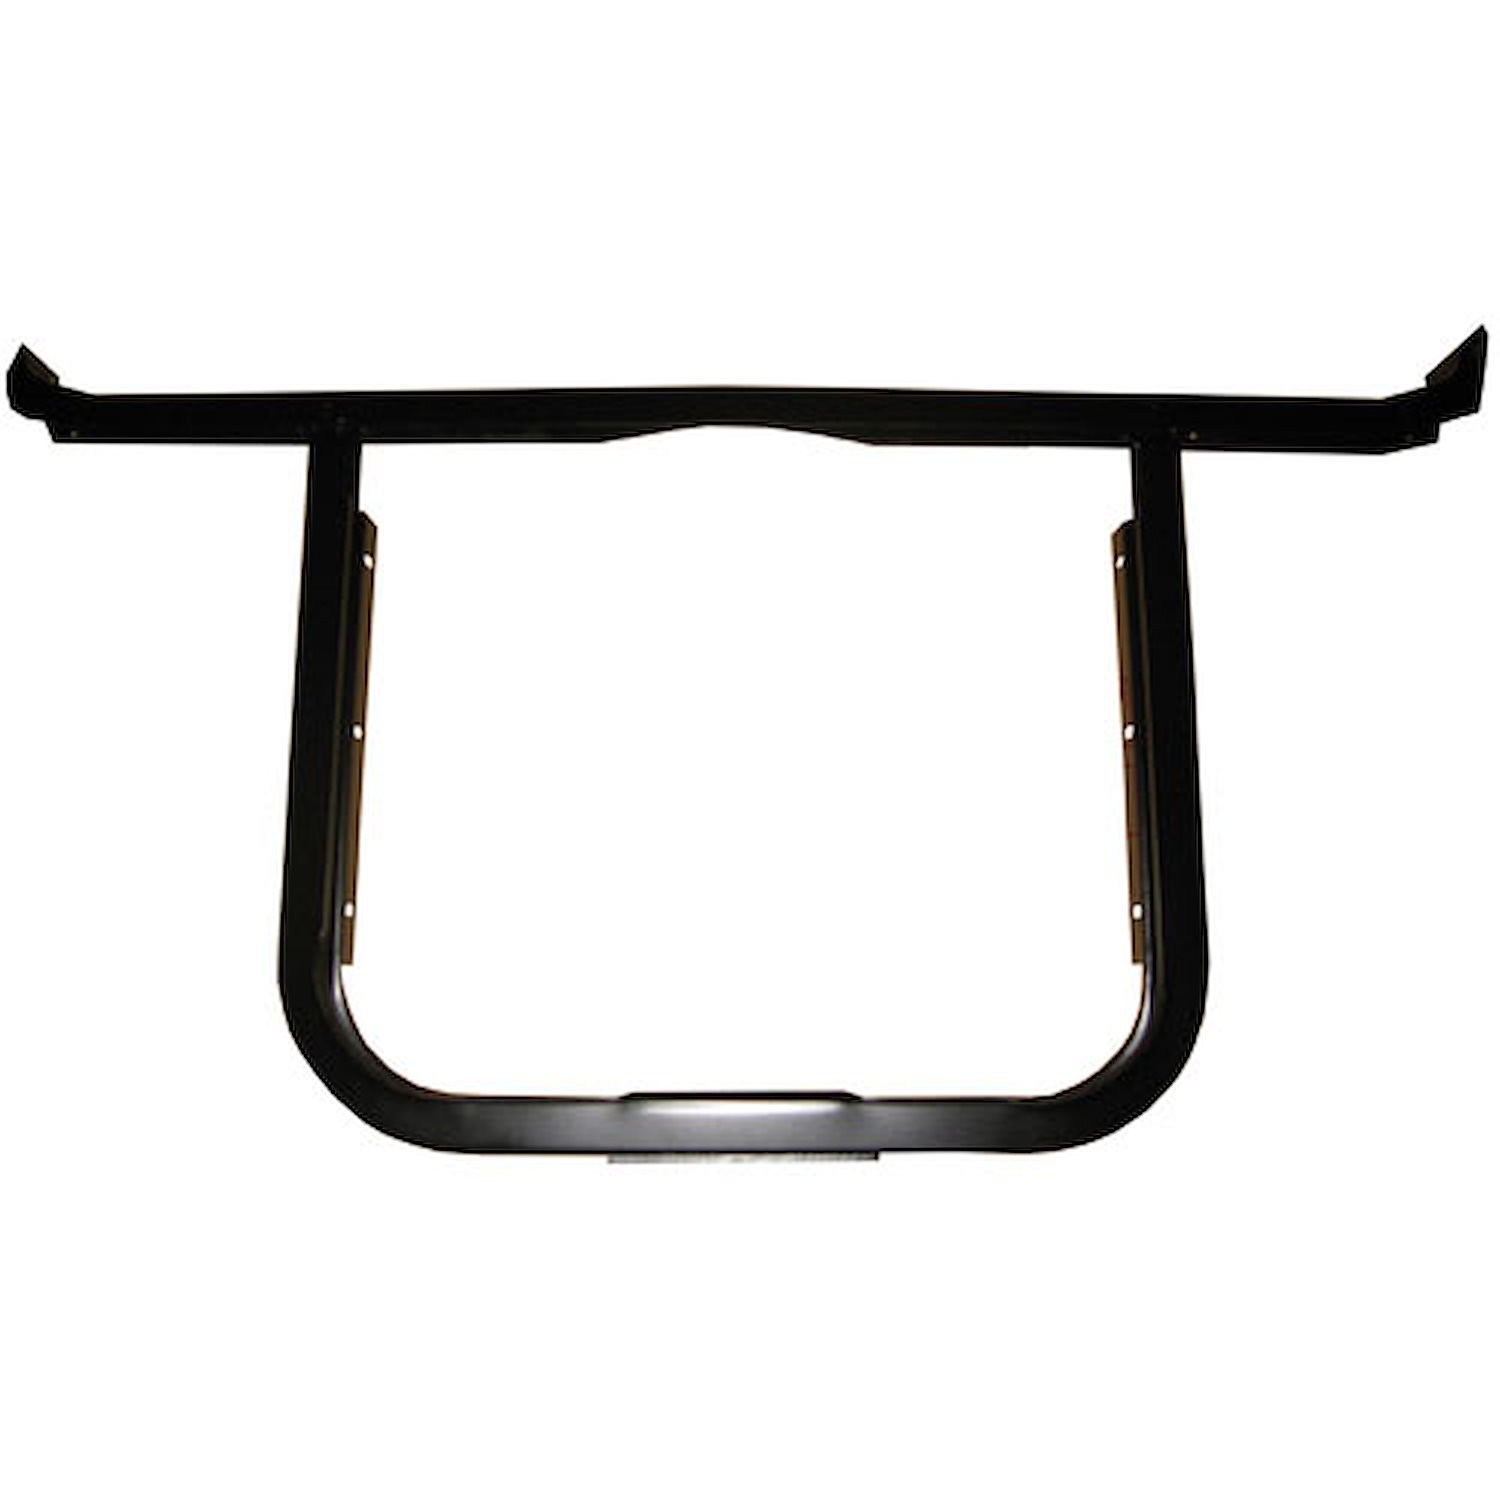 RADIATOR SUPPORT 6 CYL. ASSEMBLY 56 CHEVY